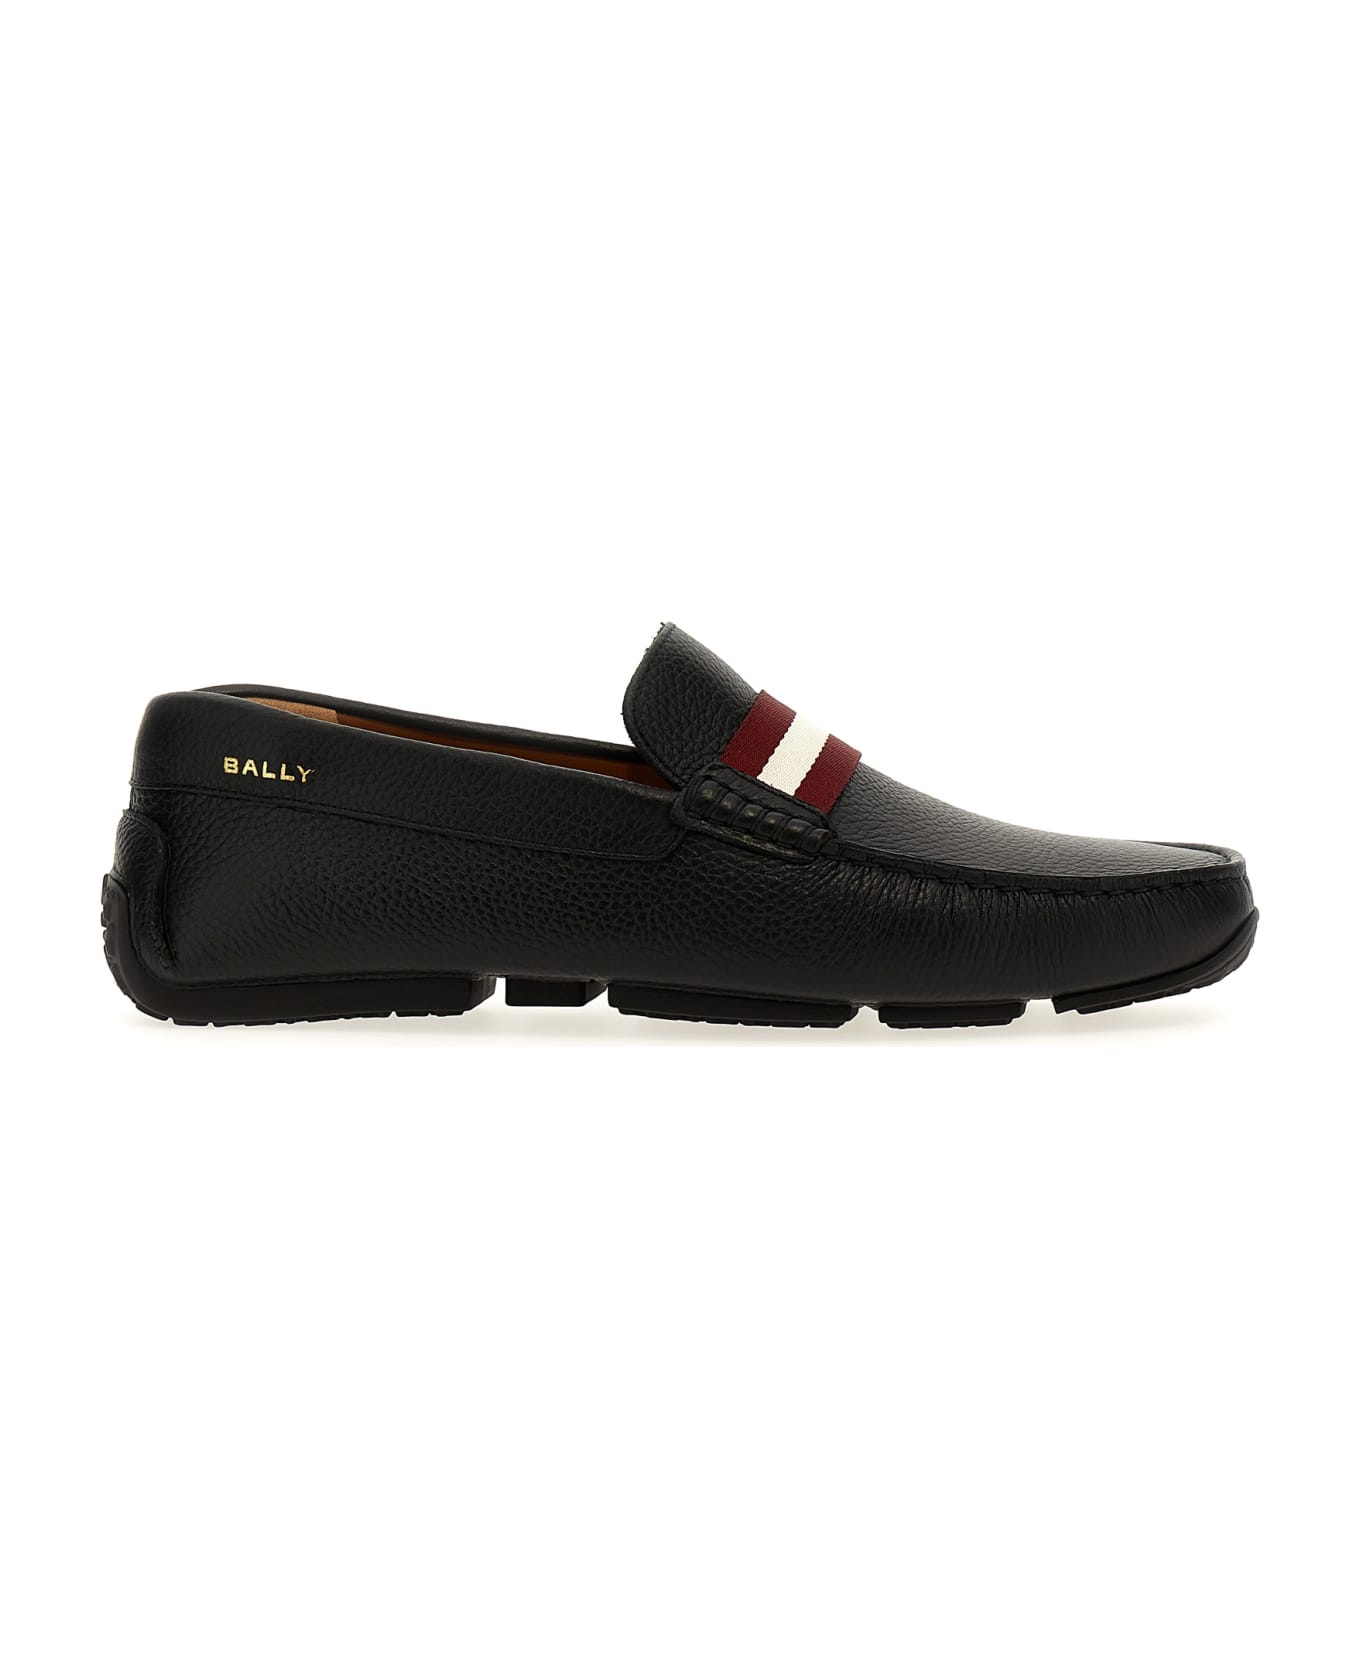 Bally 'perthy' Loafers - Black  